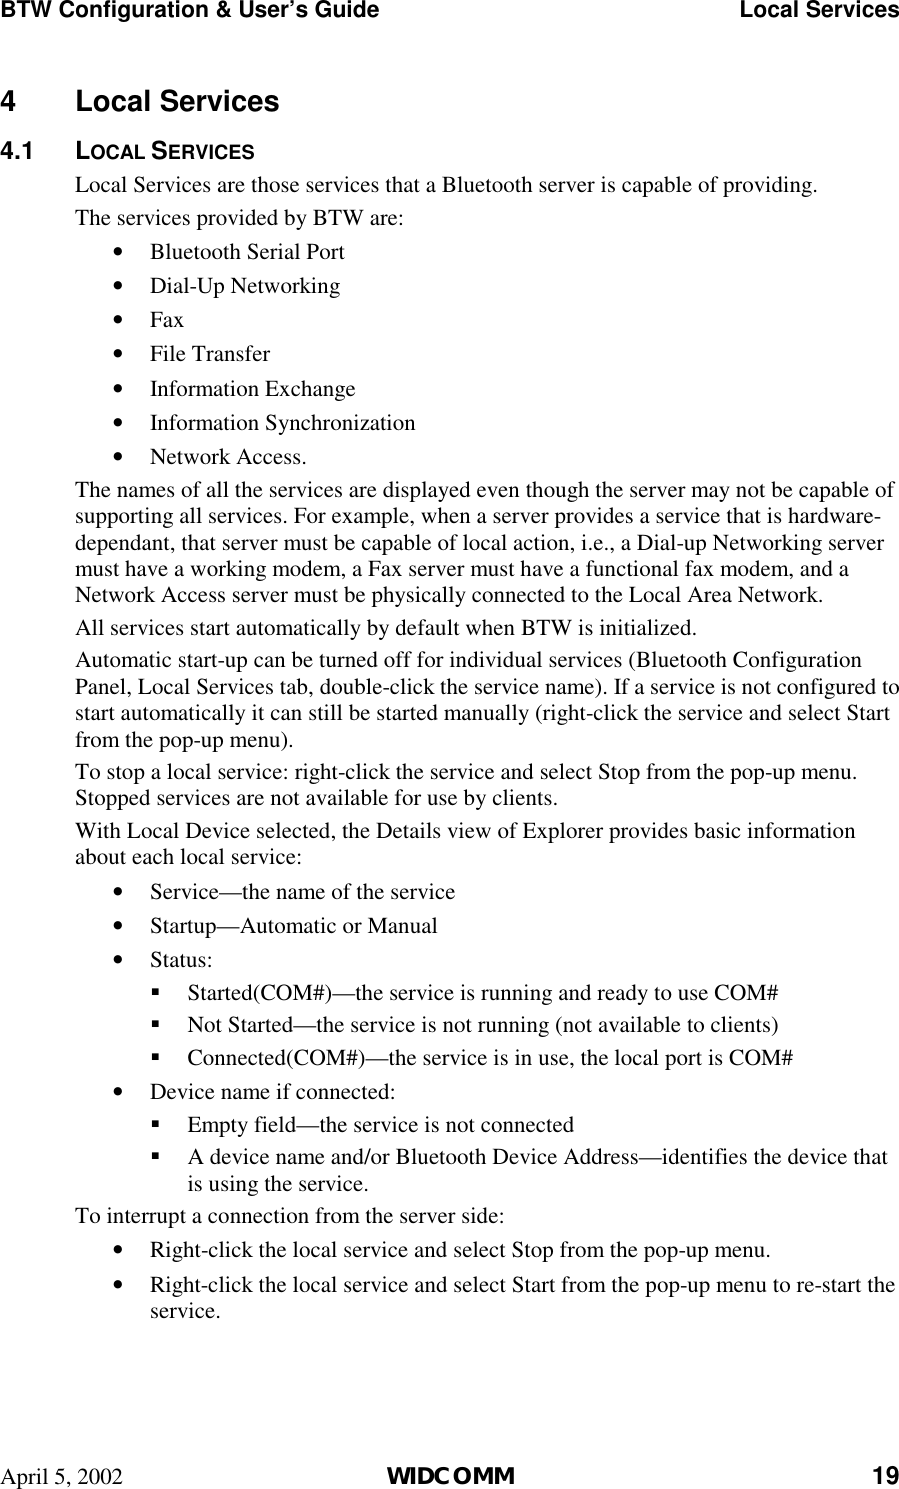 BTW Configuration &amp; User’s Guide    Local Services April 5, 2002  WIDCOMM 19 4 Local Services 4.1 LOCAL SERVICES Local Services are those services that a Bluetooth server is capable of providing. The services provided by BTW are: •  Bluetooth Serial Port  •  Dial-Up Networking •  Fax •  File Transfer •  Information Exchange •  Information Synchronization •  Network Access. The names of all the services are displayed even though the server may not be capable of supporting all services. For example, when a server provides a service that is hardware-dependant, that server must be capable of local action, i.e., a Dial-up Networking server must have a working modem, a Fax server must have a functional fax modem, and a Network Access server must be physically connected to the Local Area Network. All services start automatically by default when BTW is initialized.  Automatic start-up can be turned off for individual services (Bluetooth Configuration Panel, Local Services tab, double-click the service name). If a service is not configured to start automatically it can still be started manually (right-click the service and select Start from the pop-up menu). To stop a local service: right-click the service and select Stop from the pop-up menu. Stopped services are not available for use by clients. With Local Device selected, the Details view of Explorer provides basic information about each local service: •  Service—the name of the service •  Startup—Automatic or Manual •  Status: !  Started(COM#)—the service is running and ready to use COM#  !  Not Started—the service is not running (not available to clients) !  Connected(COM#)—the service is in use, the local port is COM# •  Device name if connected: !  Empty field—the service is not connected !  A device name and/or Bluetooth Device Address—identifies the device that is using the service. To interrupt a connection from the server side: •  Right-click the local service and select Stop from the pop-up menu. •  Right-click the local service and select Start from the pop-up menu to re-start the service.